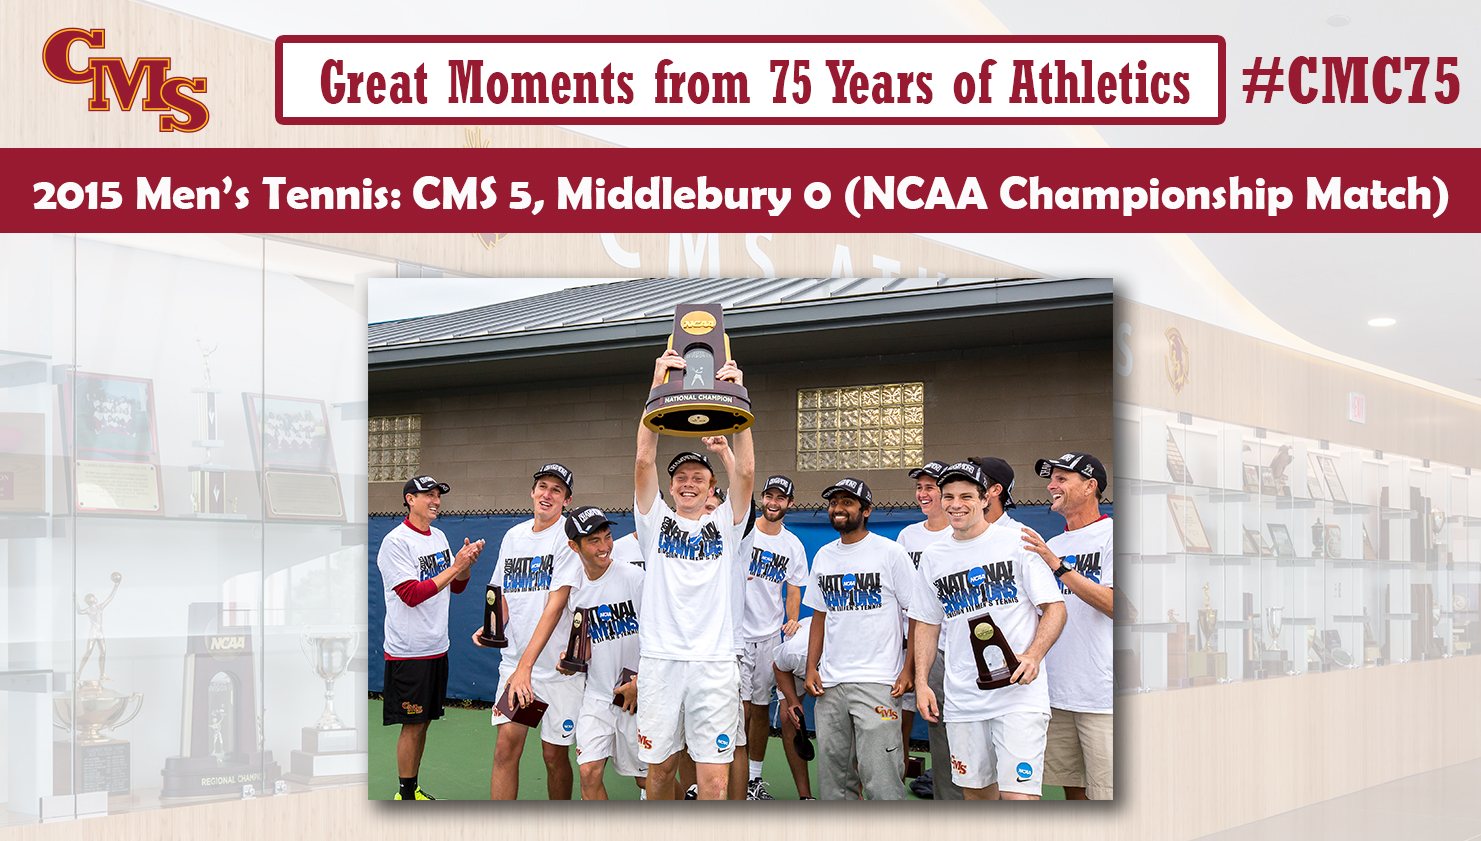 The Stags celebrating with the national championship trophy. Words over the photo read: Great Moments from 75 Years of Athletics, 2015 Men's Tennis: CMS 5, Middlebury 0 (NCAA Championship Match).